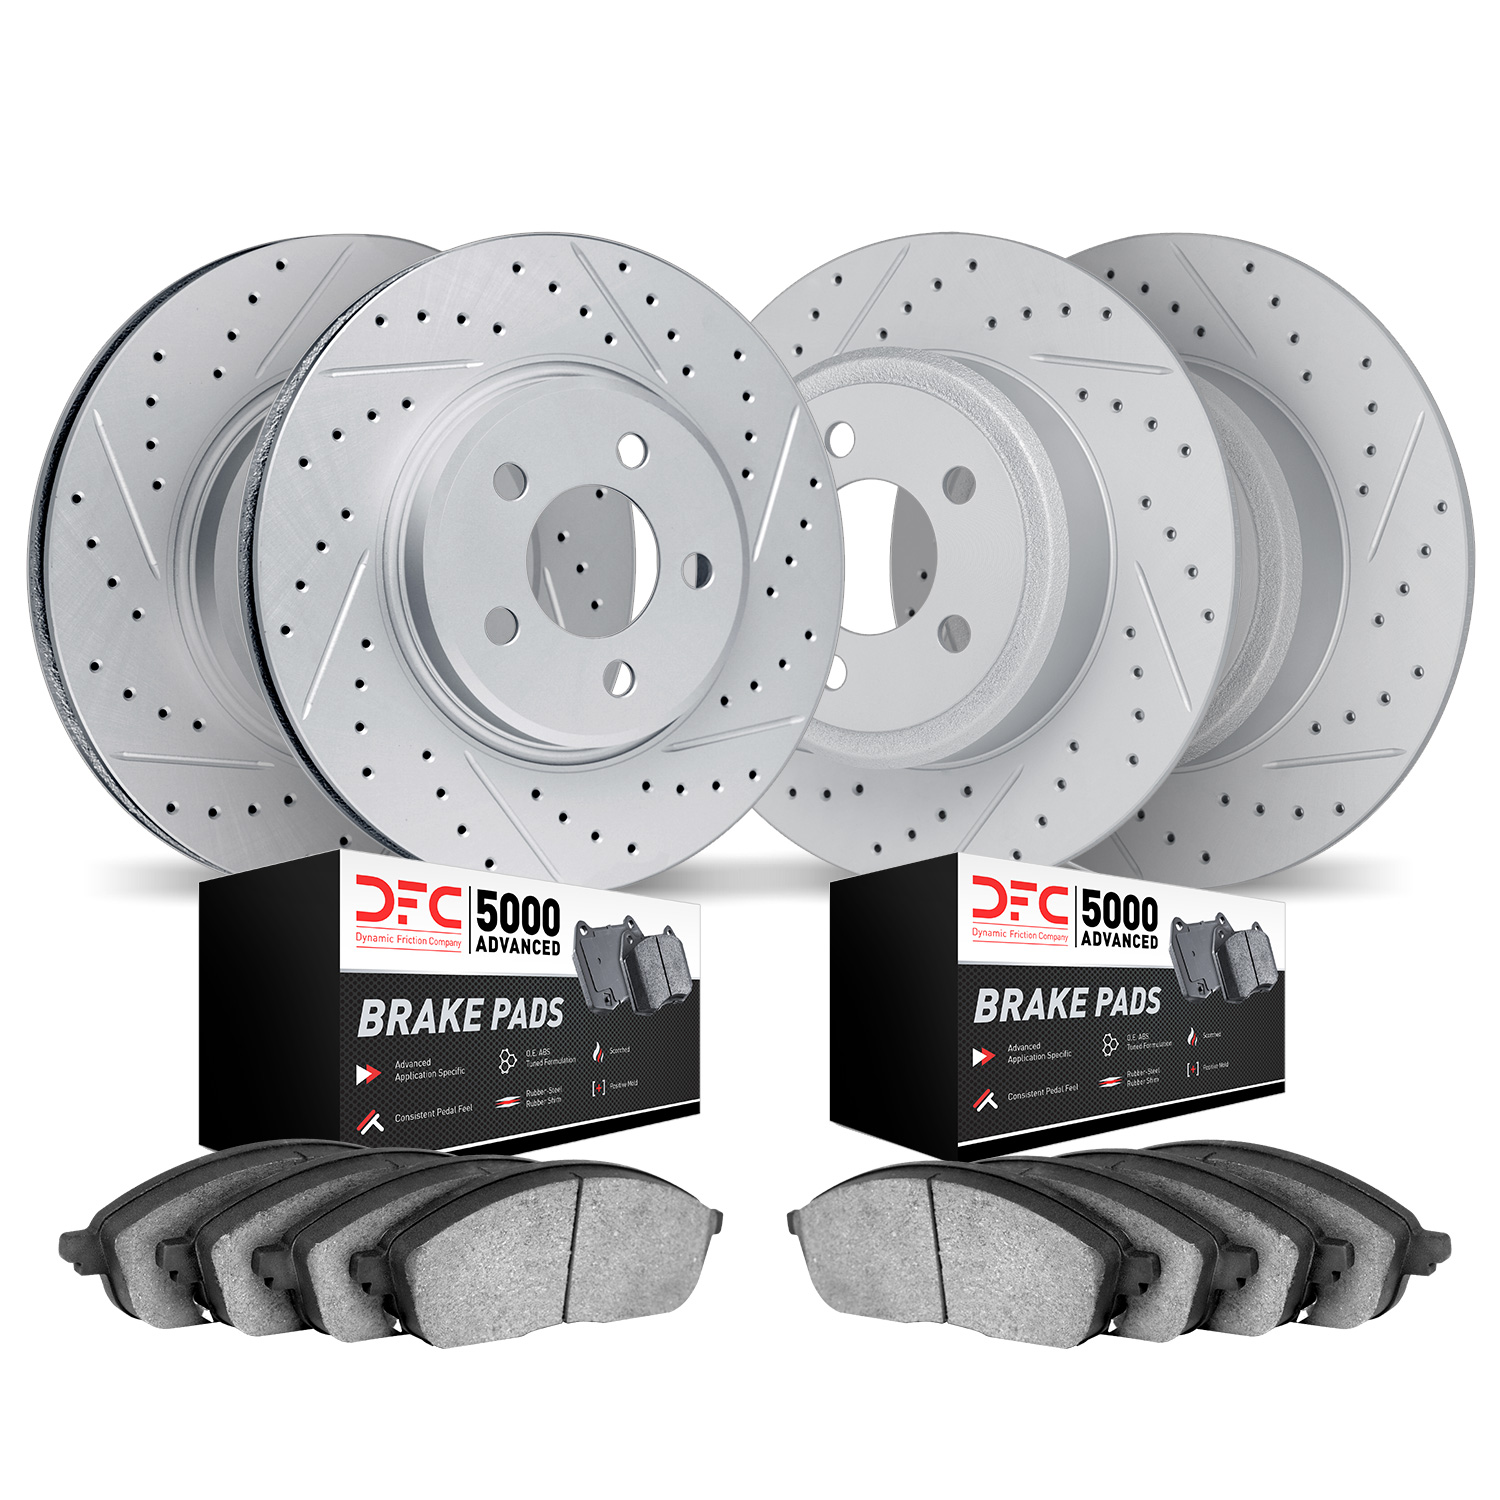 2504-45031 Geoperformance Drilled/Slotted Rotors w/5000 Advanced Brake Pads Kit, 2017-2020 GM, Position: Front and Rear